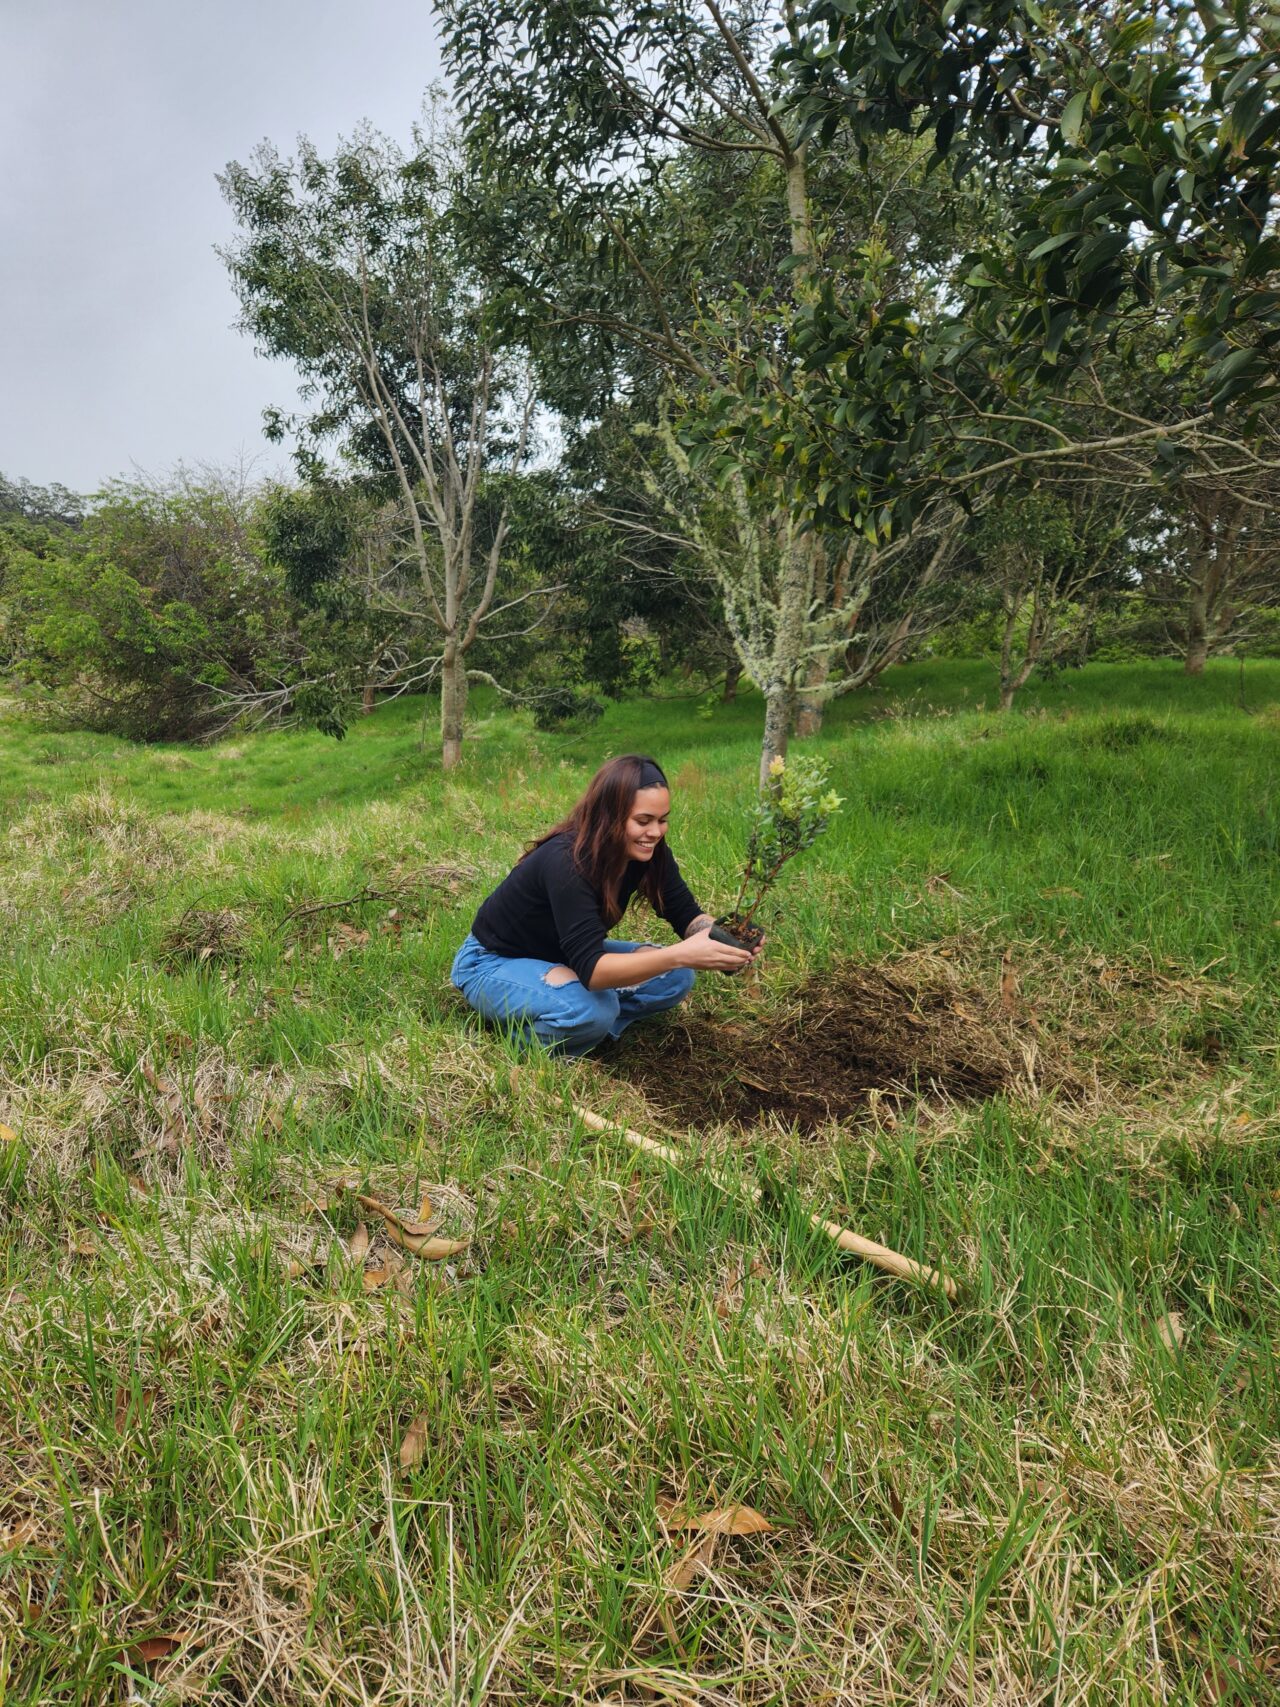 Image of a young woman planting a tree Courtesy of Pilina Aina